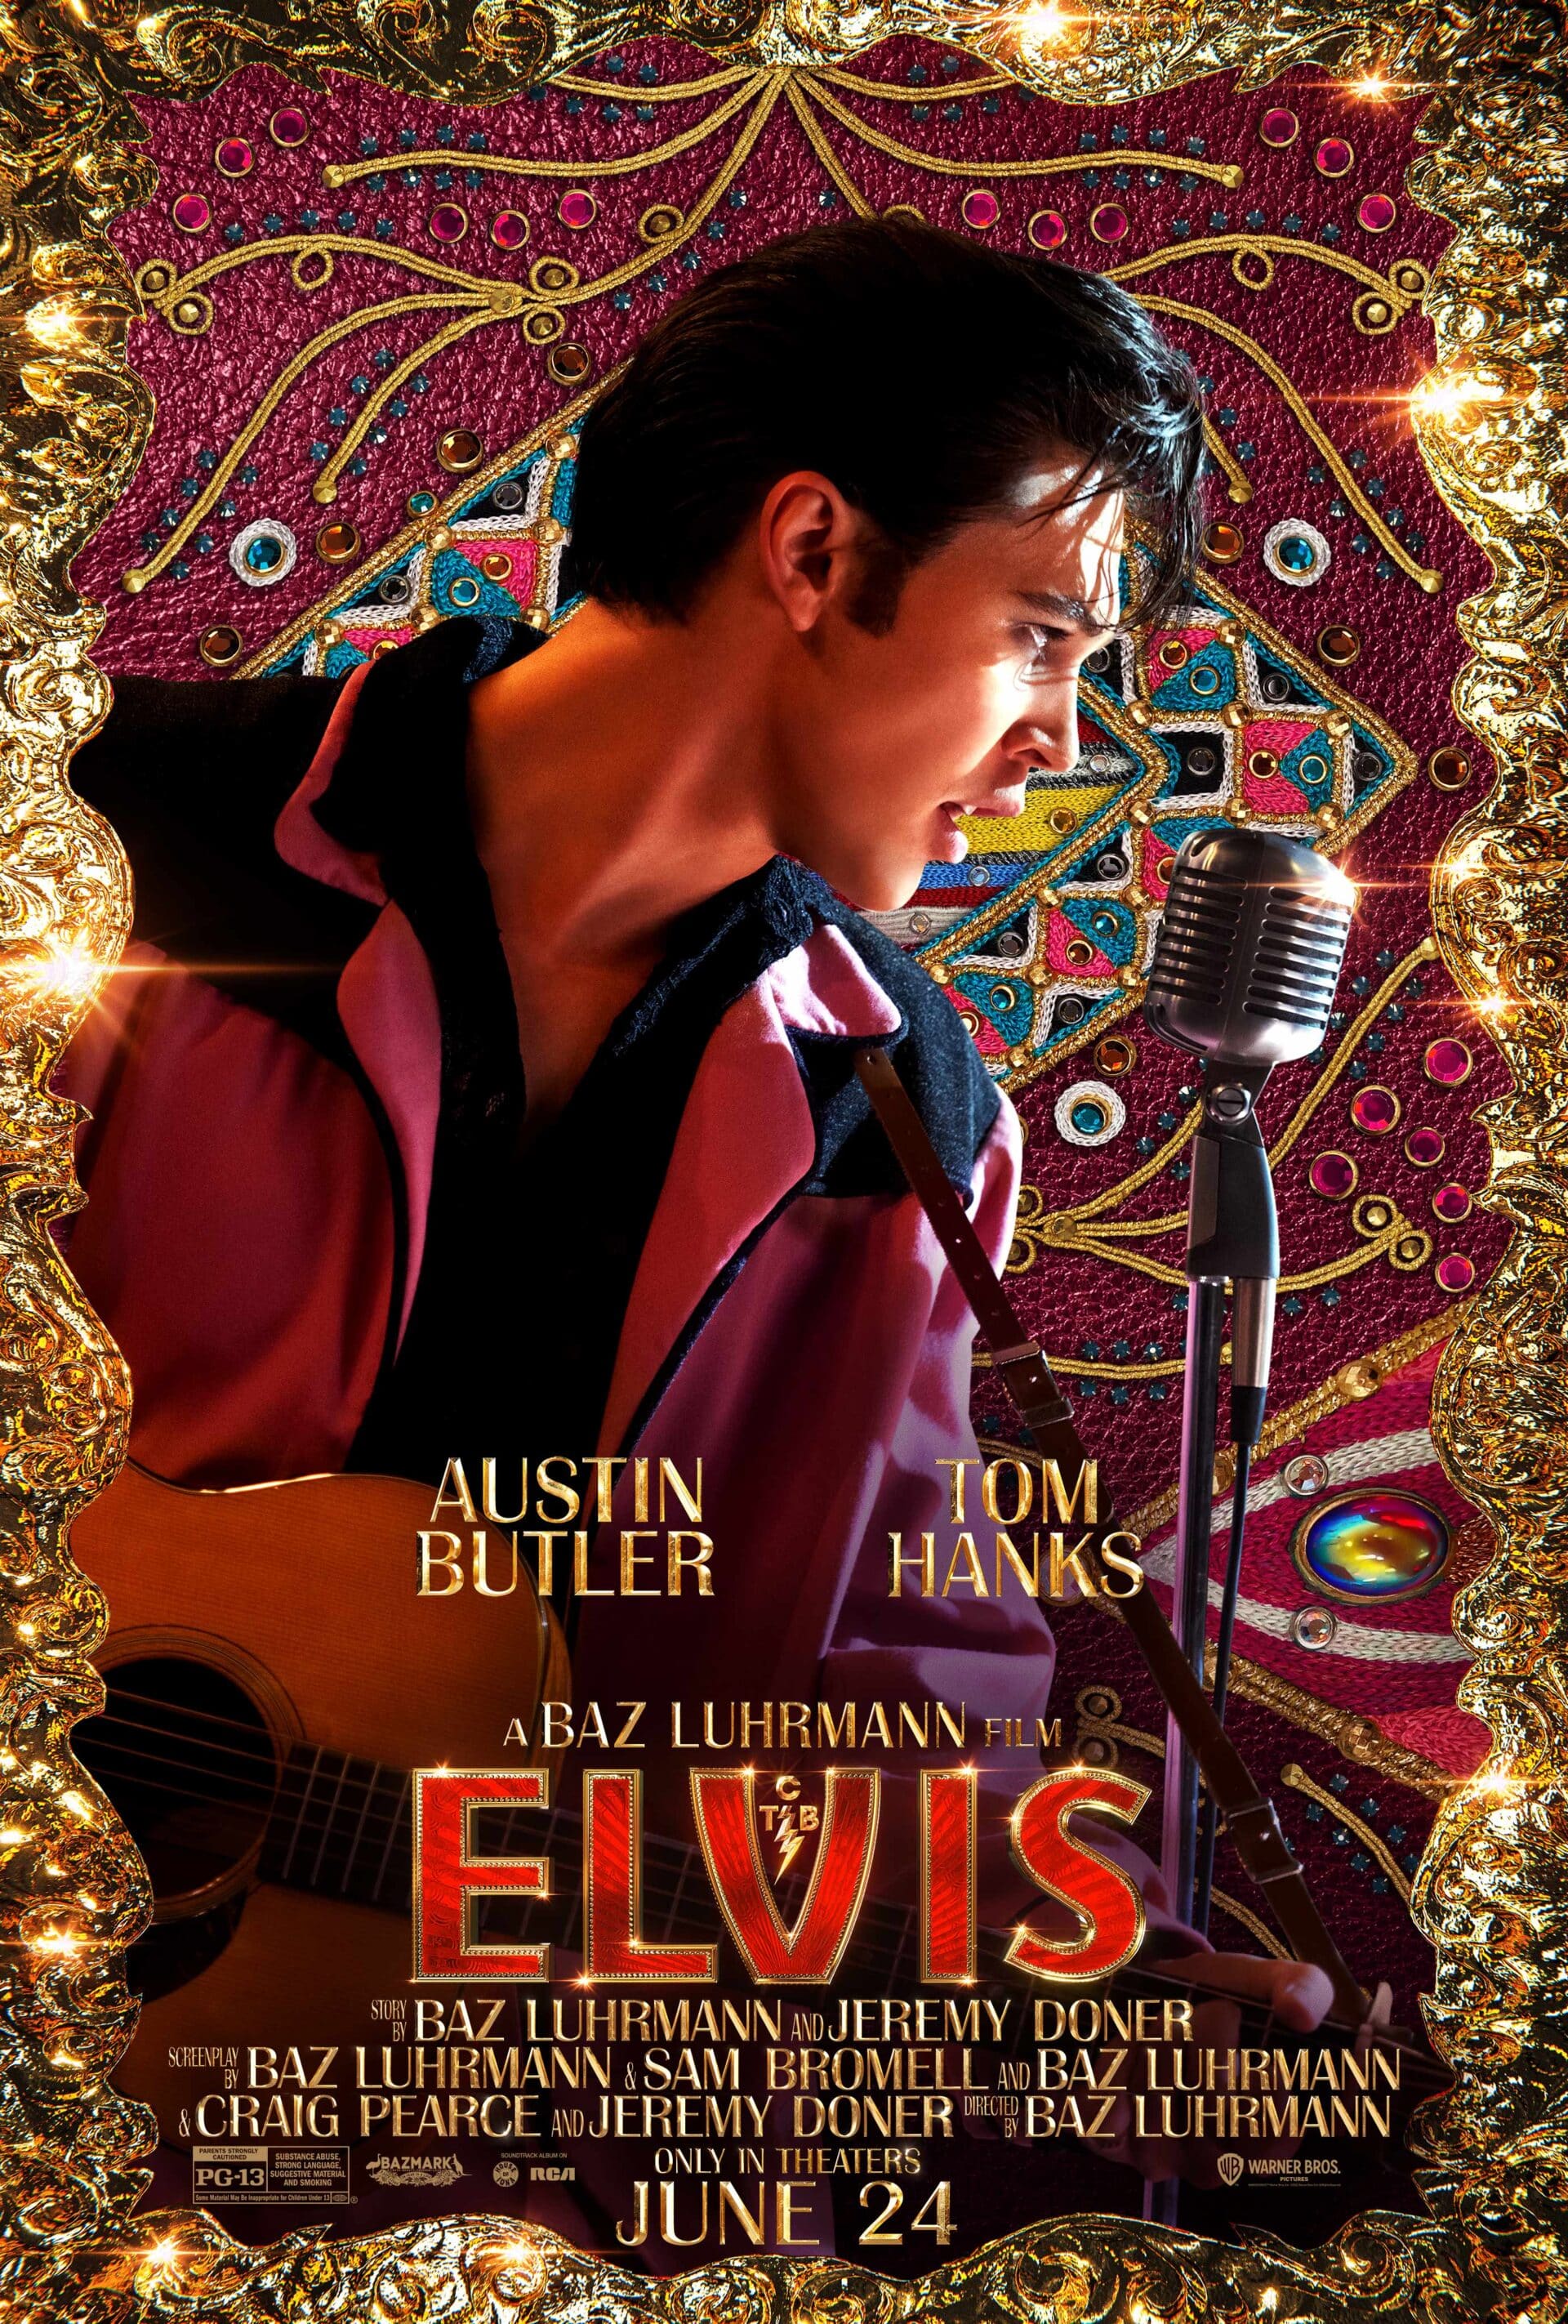 Elvis 50's, The Franklin Theatre in downtown Franklin to Screen Middle Tennessee Premiere of Baz Luhrmann’s “Elvis” Biopic.